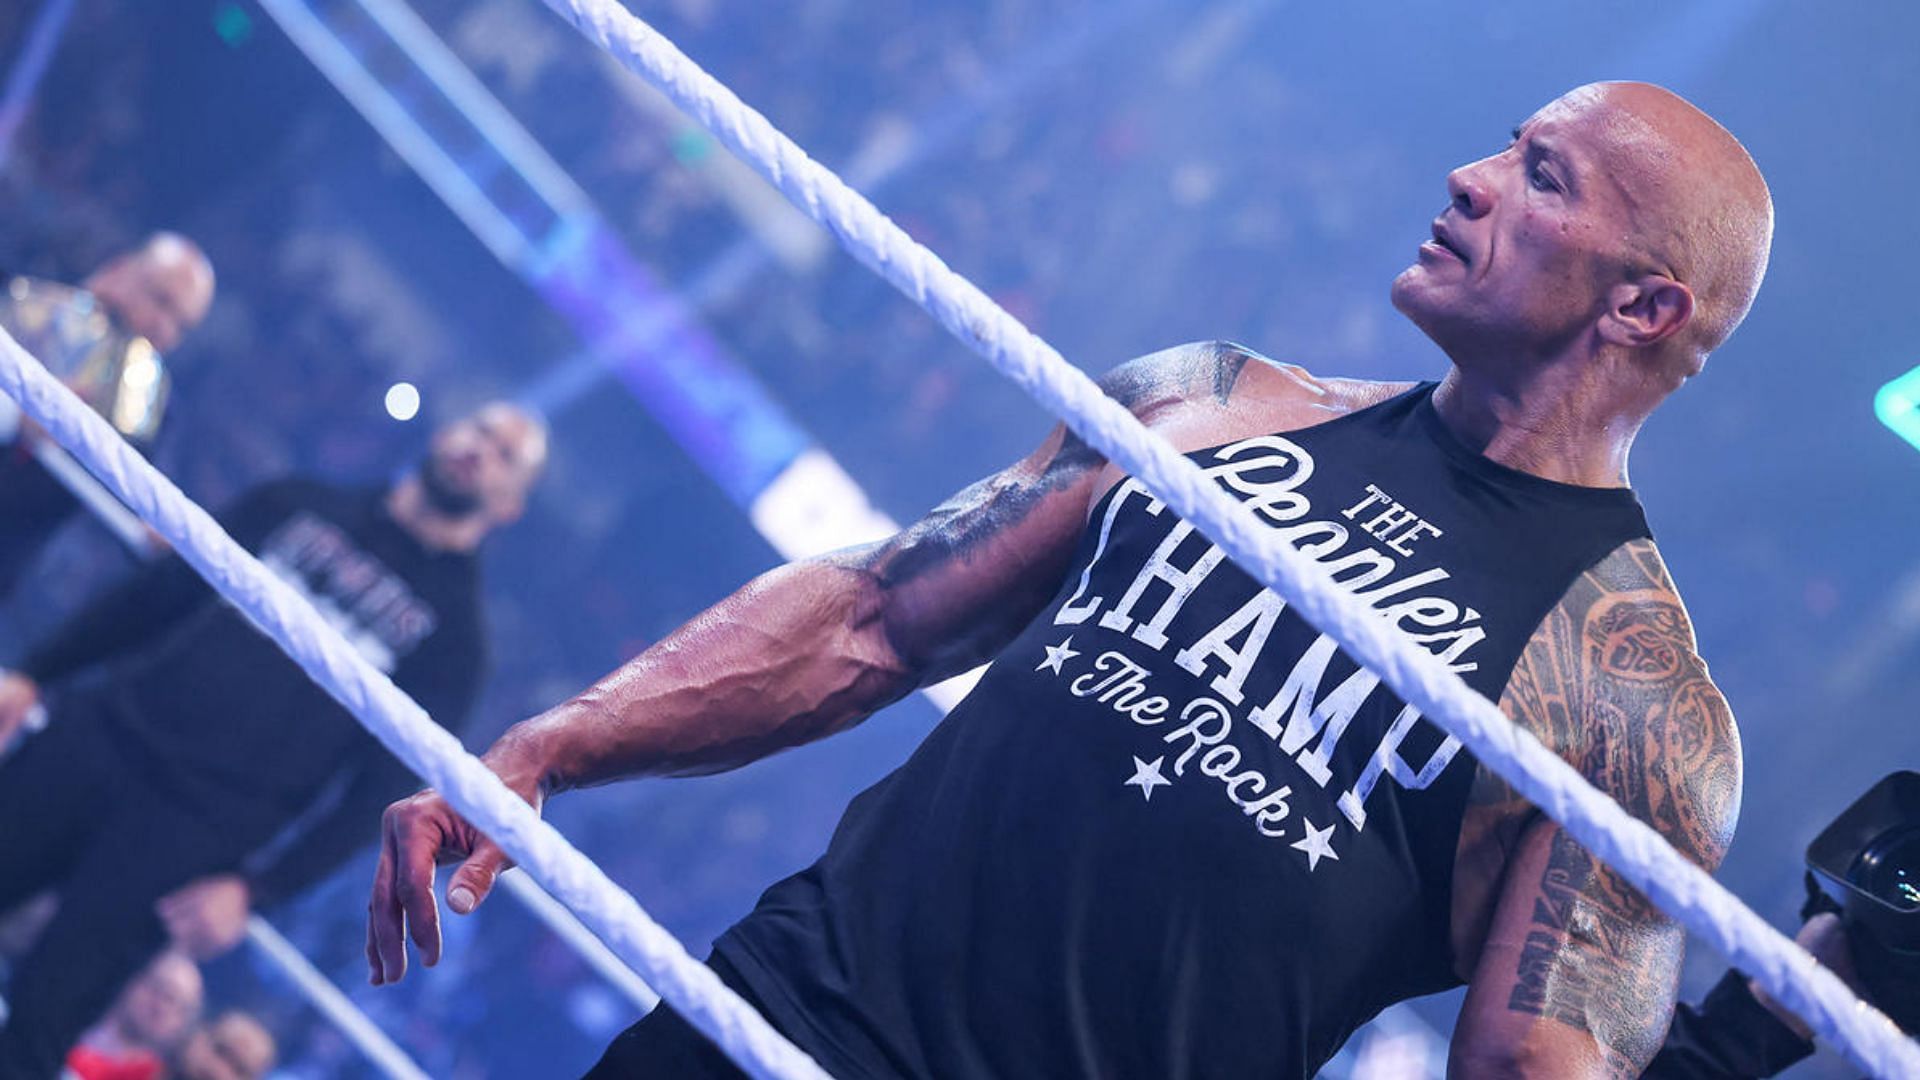 The Rock and Roman Reigns on Friday Night SmackDown!